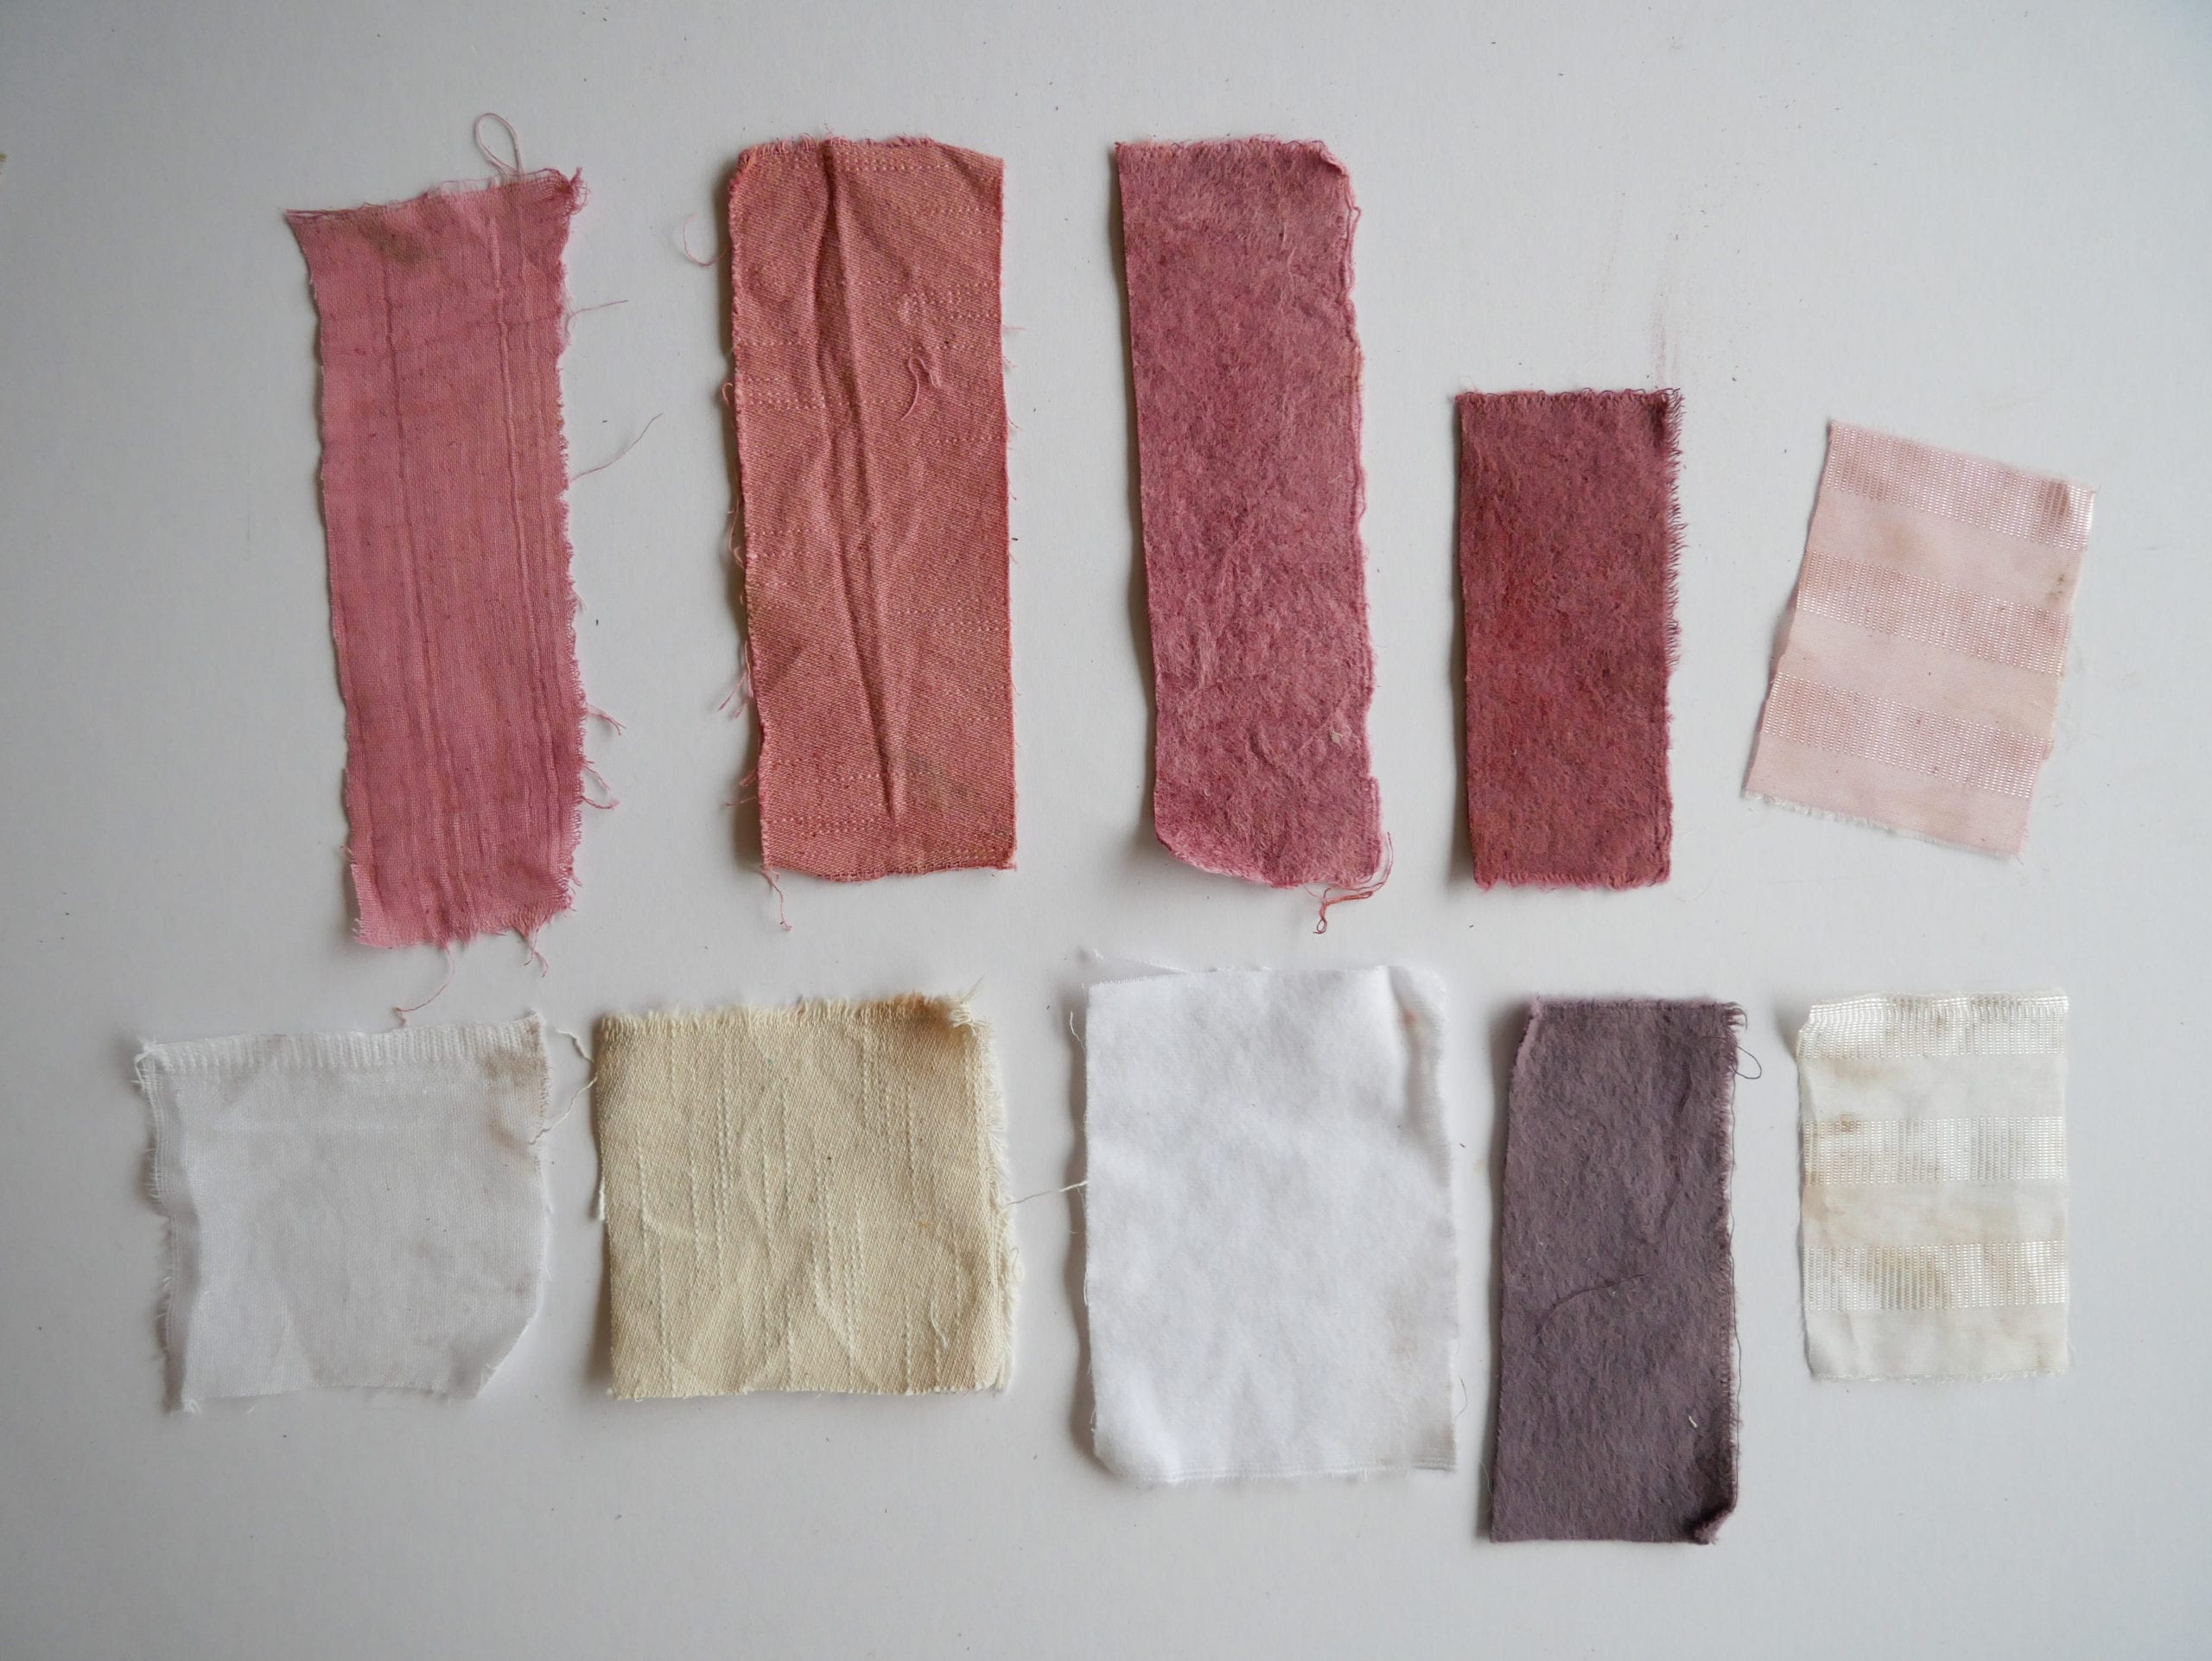 Samples of natural dyed brazilwood and samples pre-dye